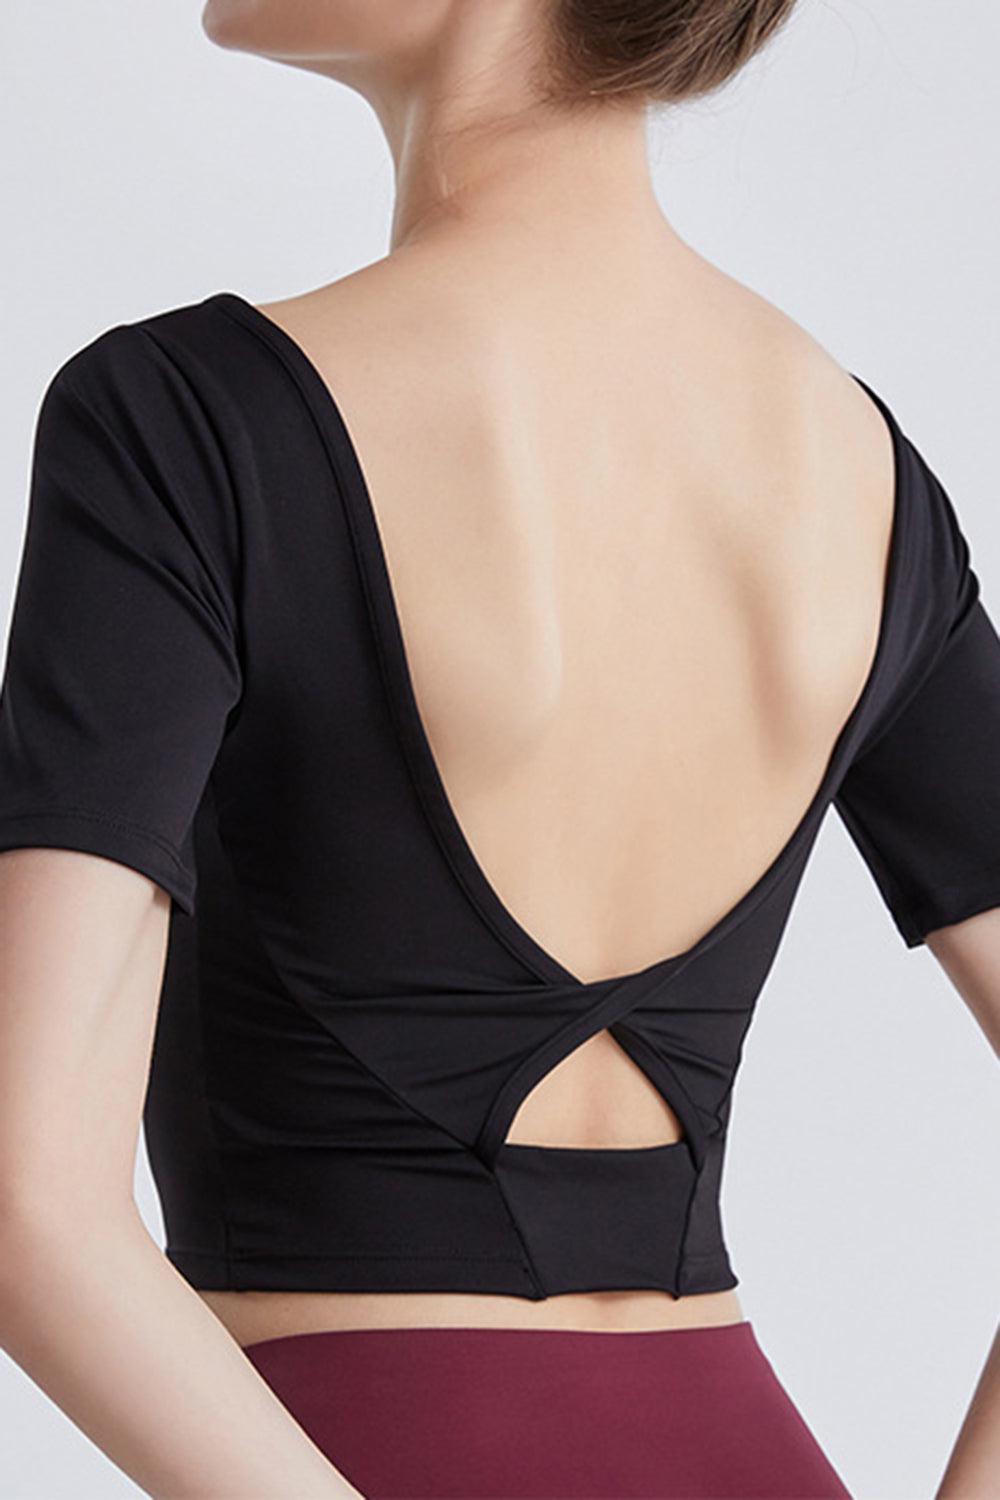 a woman wearing a black top with a cut out back